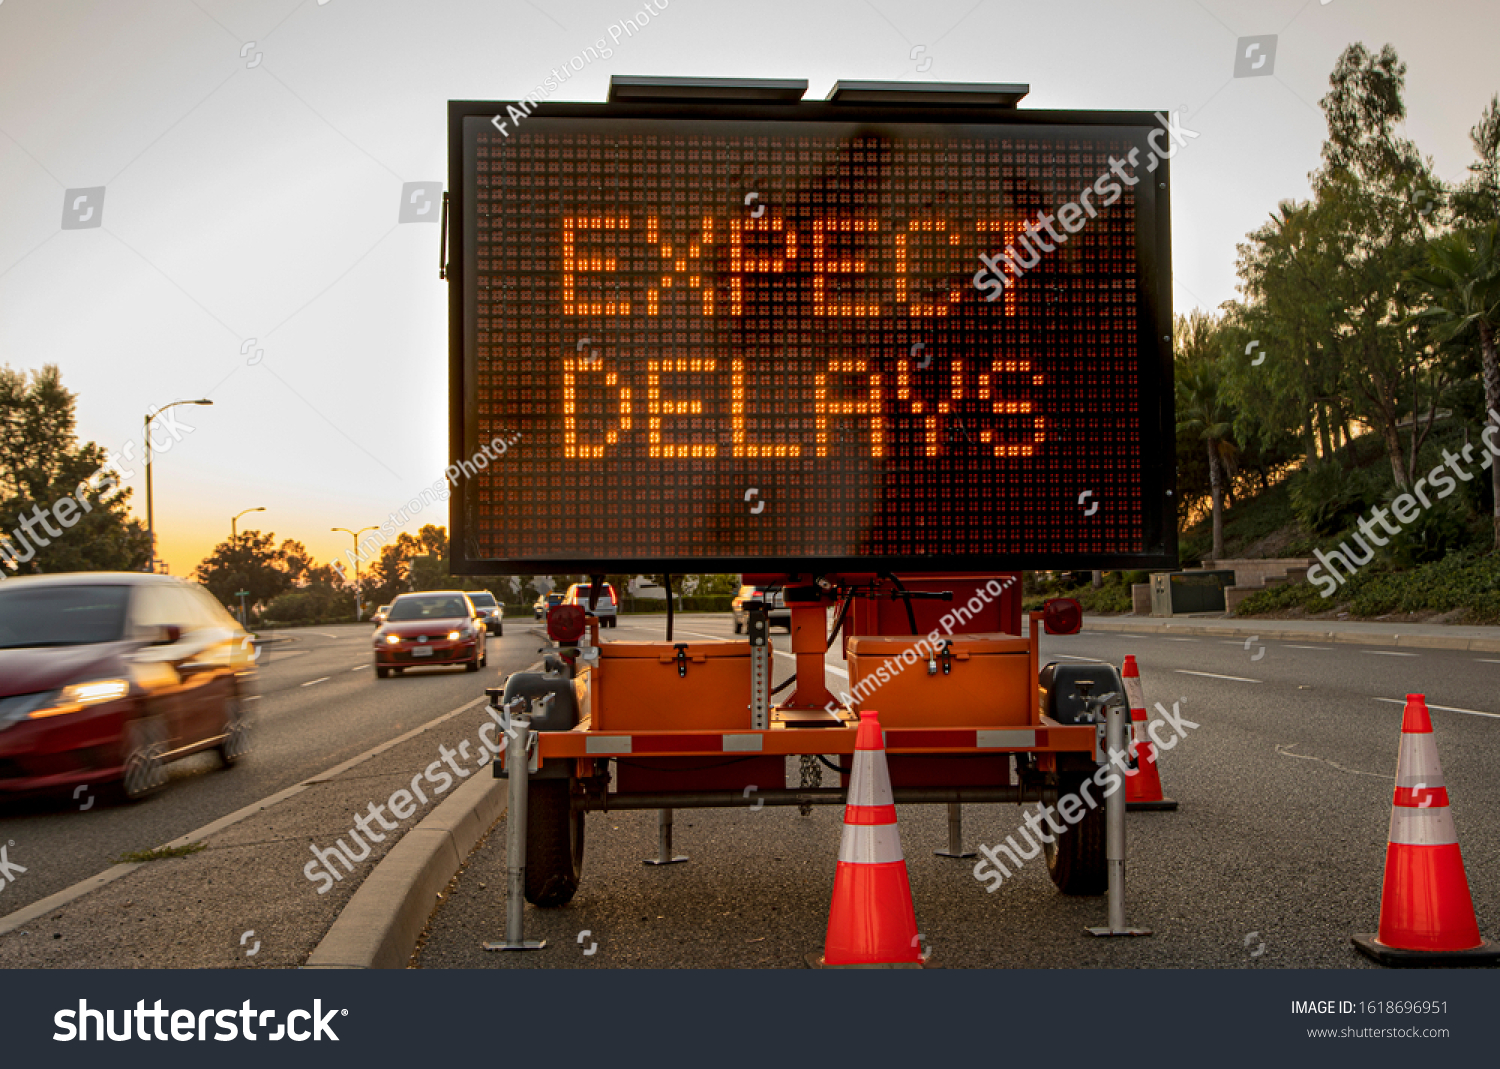 Mobile Electronic Traffic Sign stating “expect Delays” taken at sunset with traffic blurred driving past the sign and traffic cones #1618696951